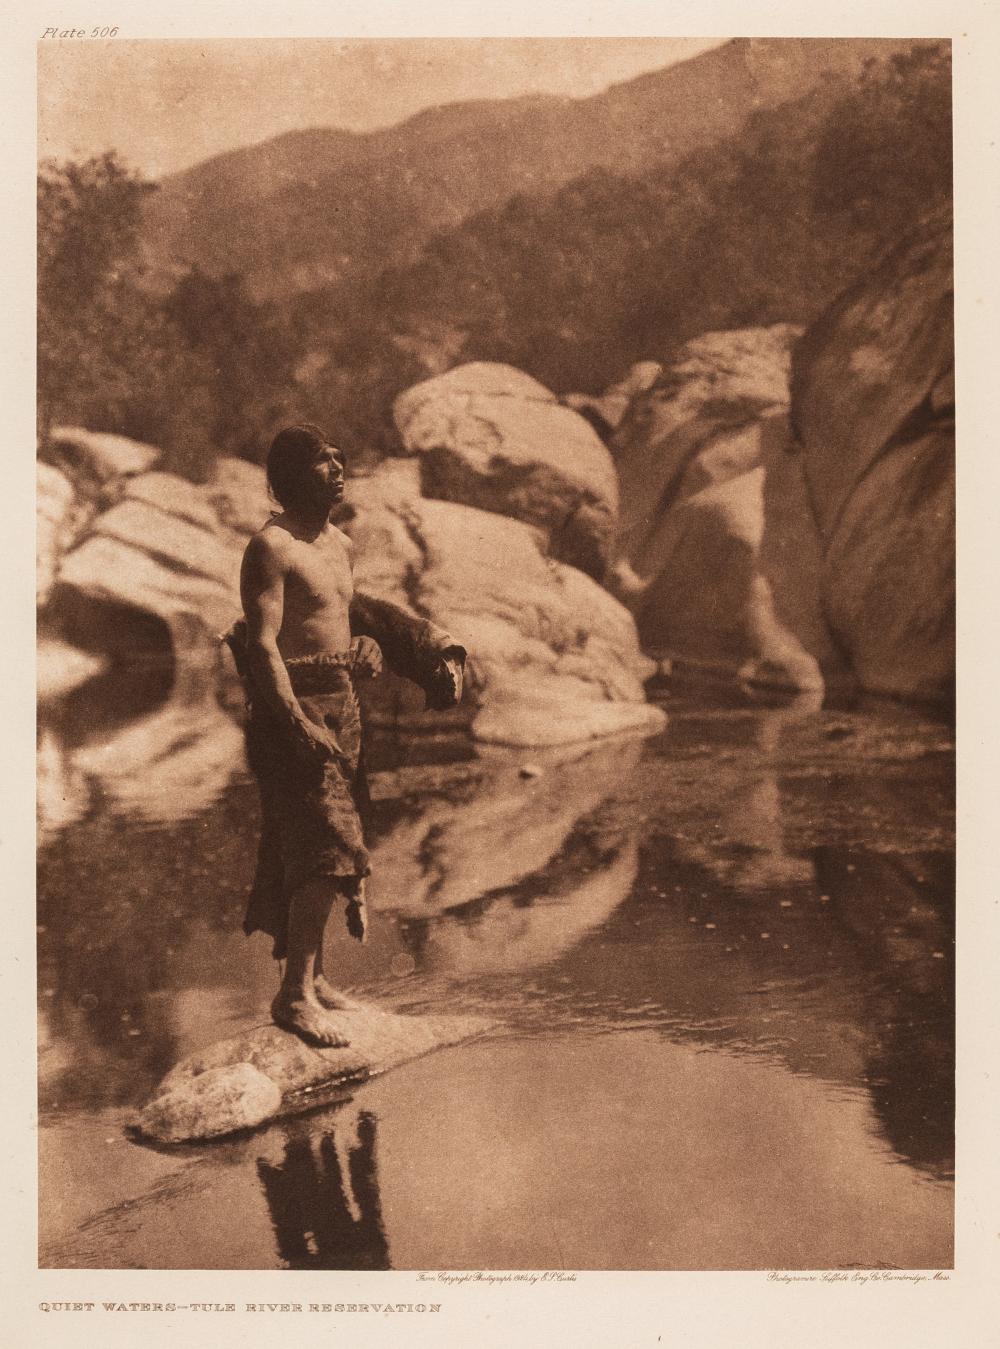 EDWARD S. CURTIS, QUIET WATERS